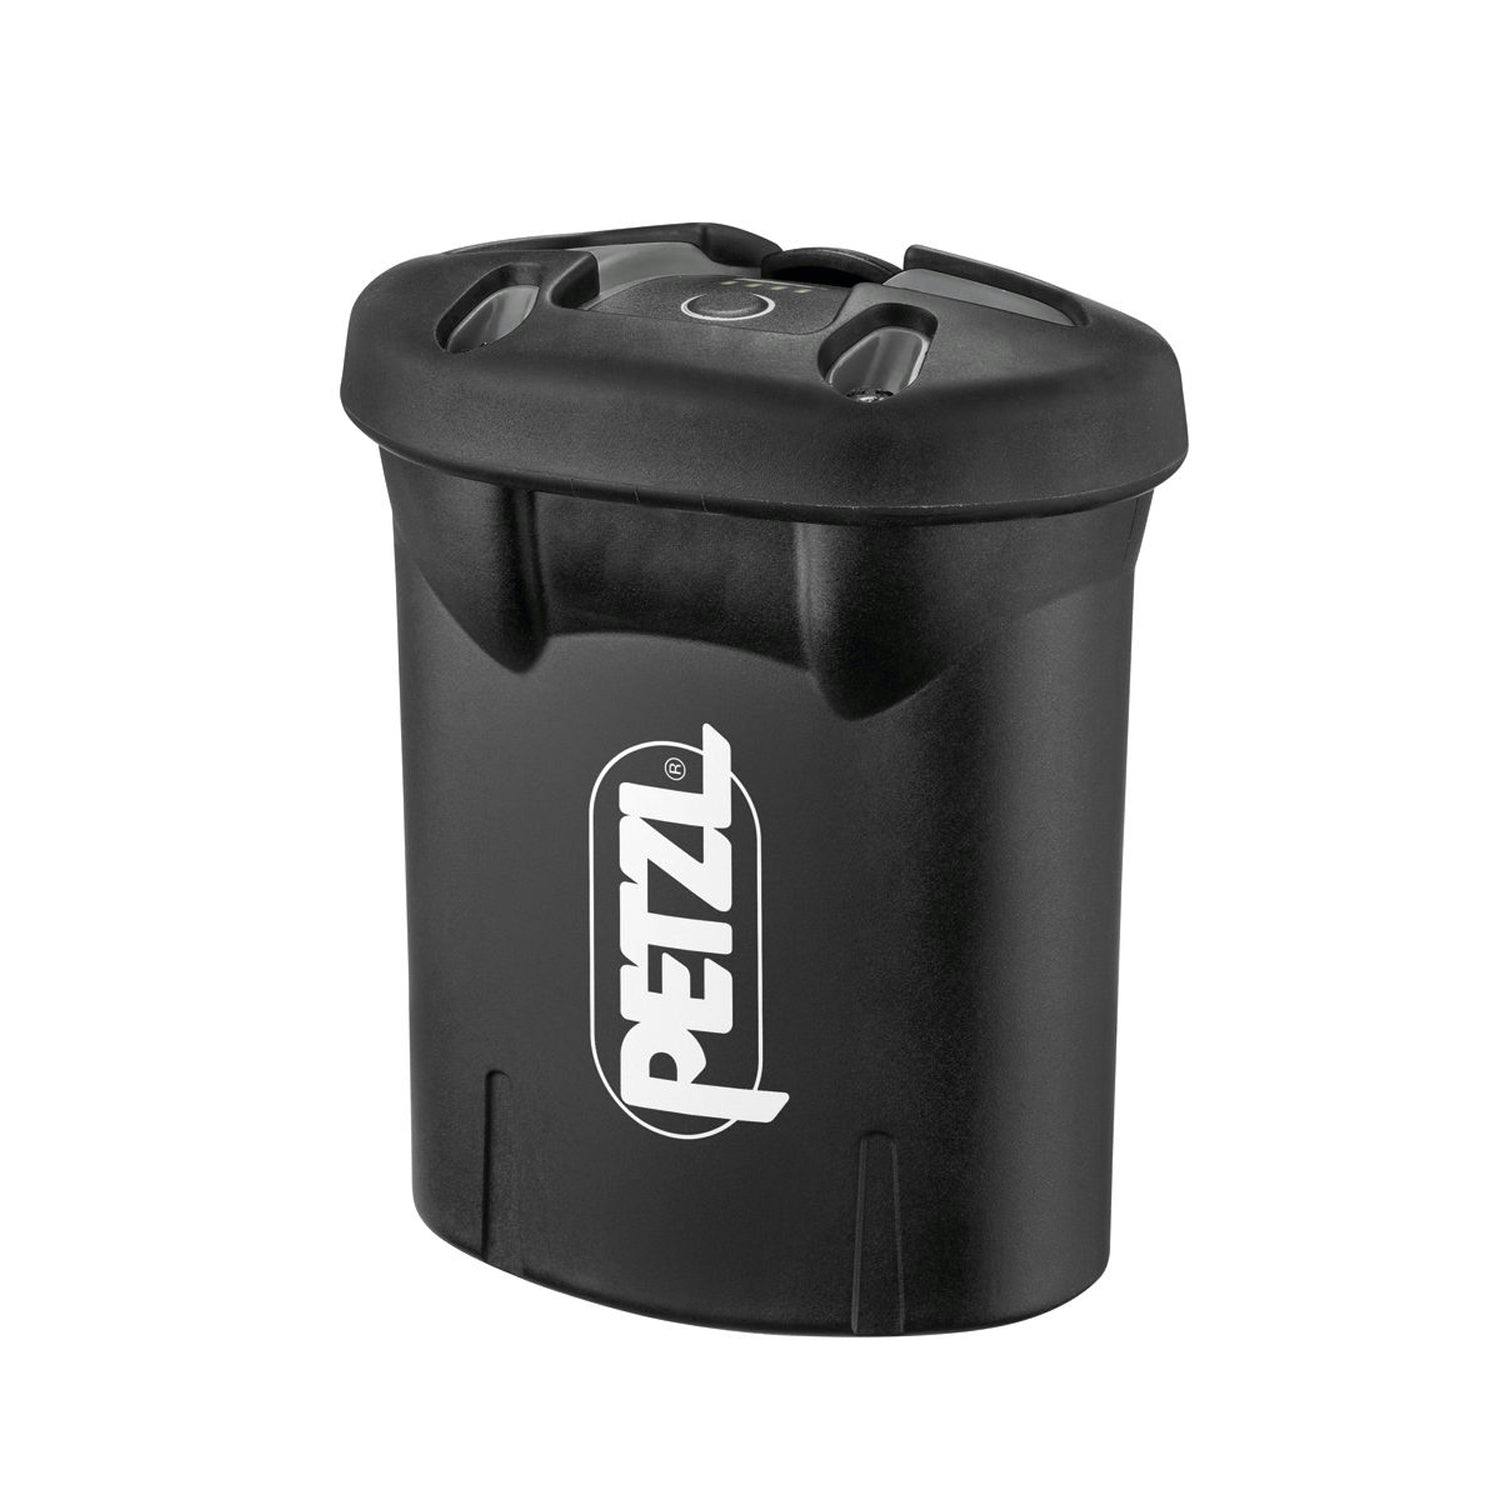 Petzl R2 Spare Battery Duo Rl/Duo S